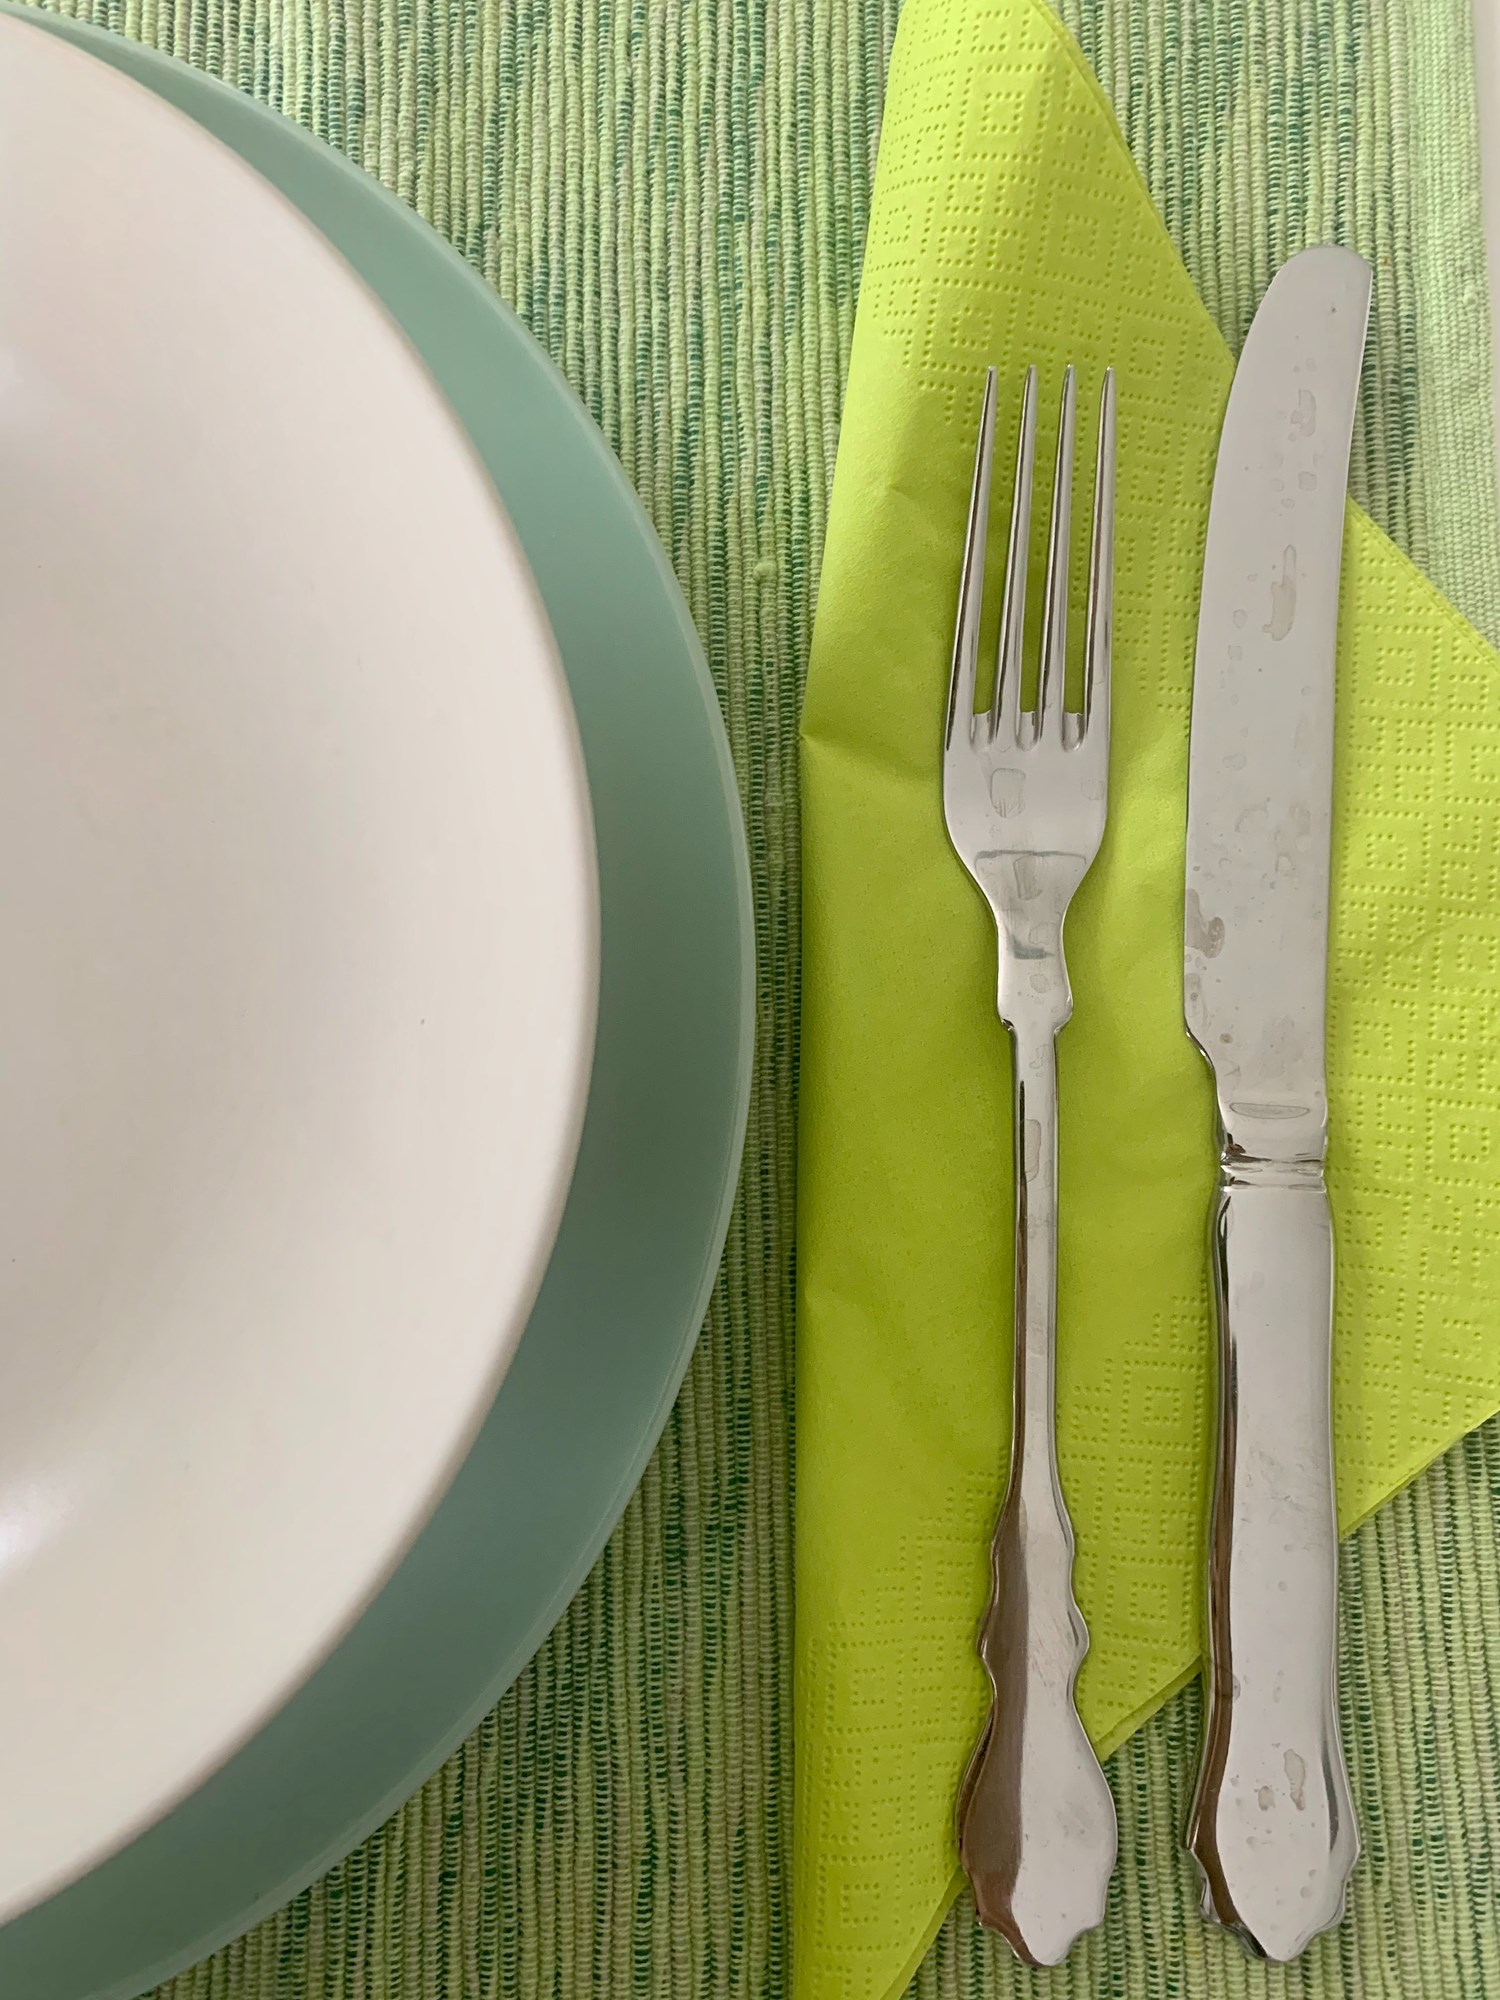 plate, fork, and knife on napkin